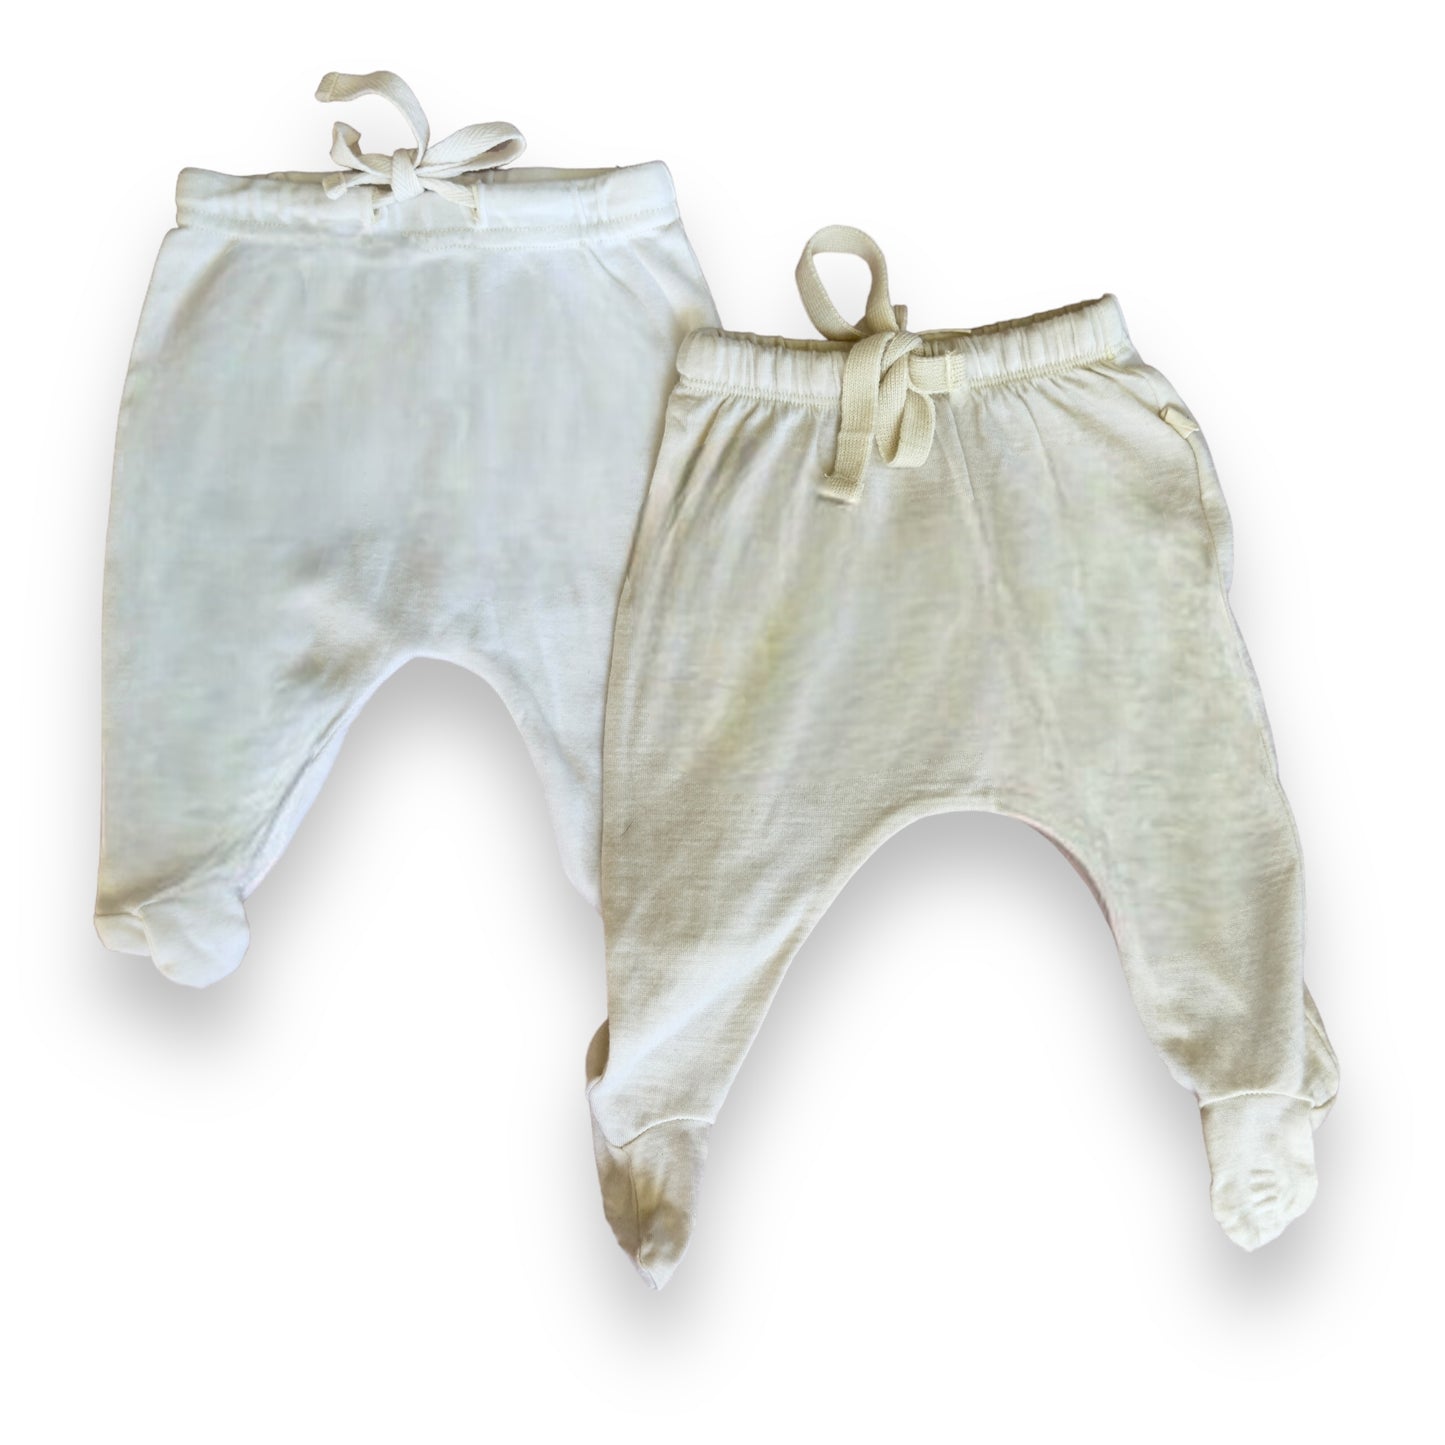 2 x Nature Baby footed pants | 0-3 months | GUC